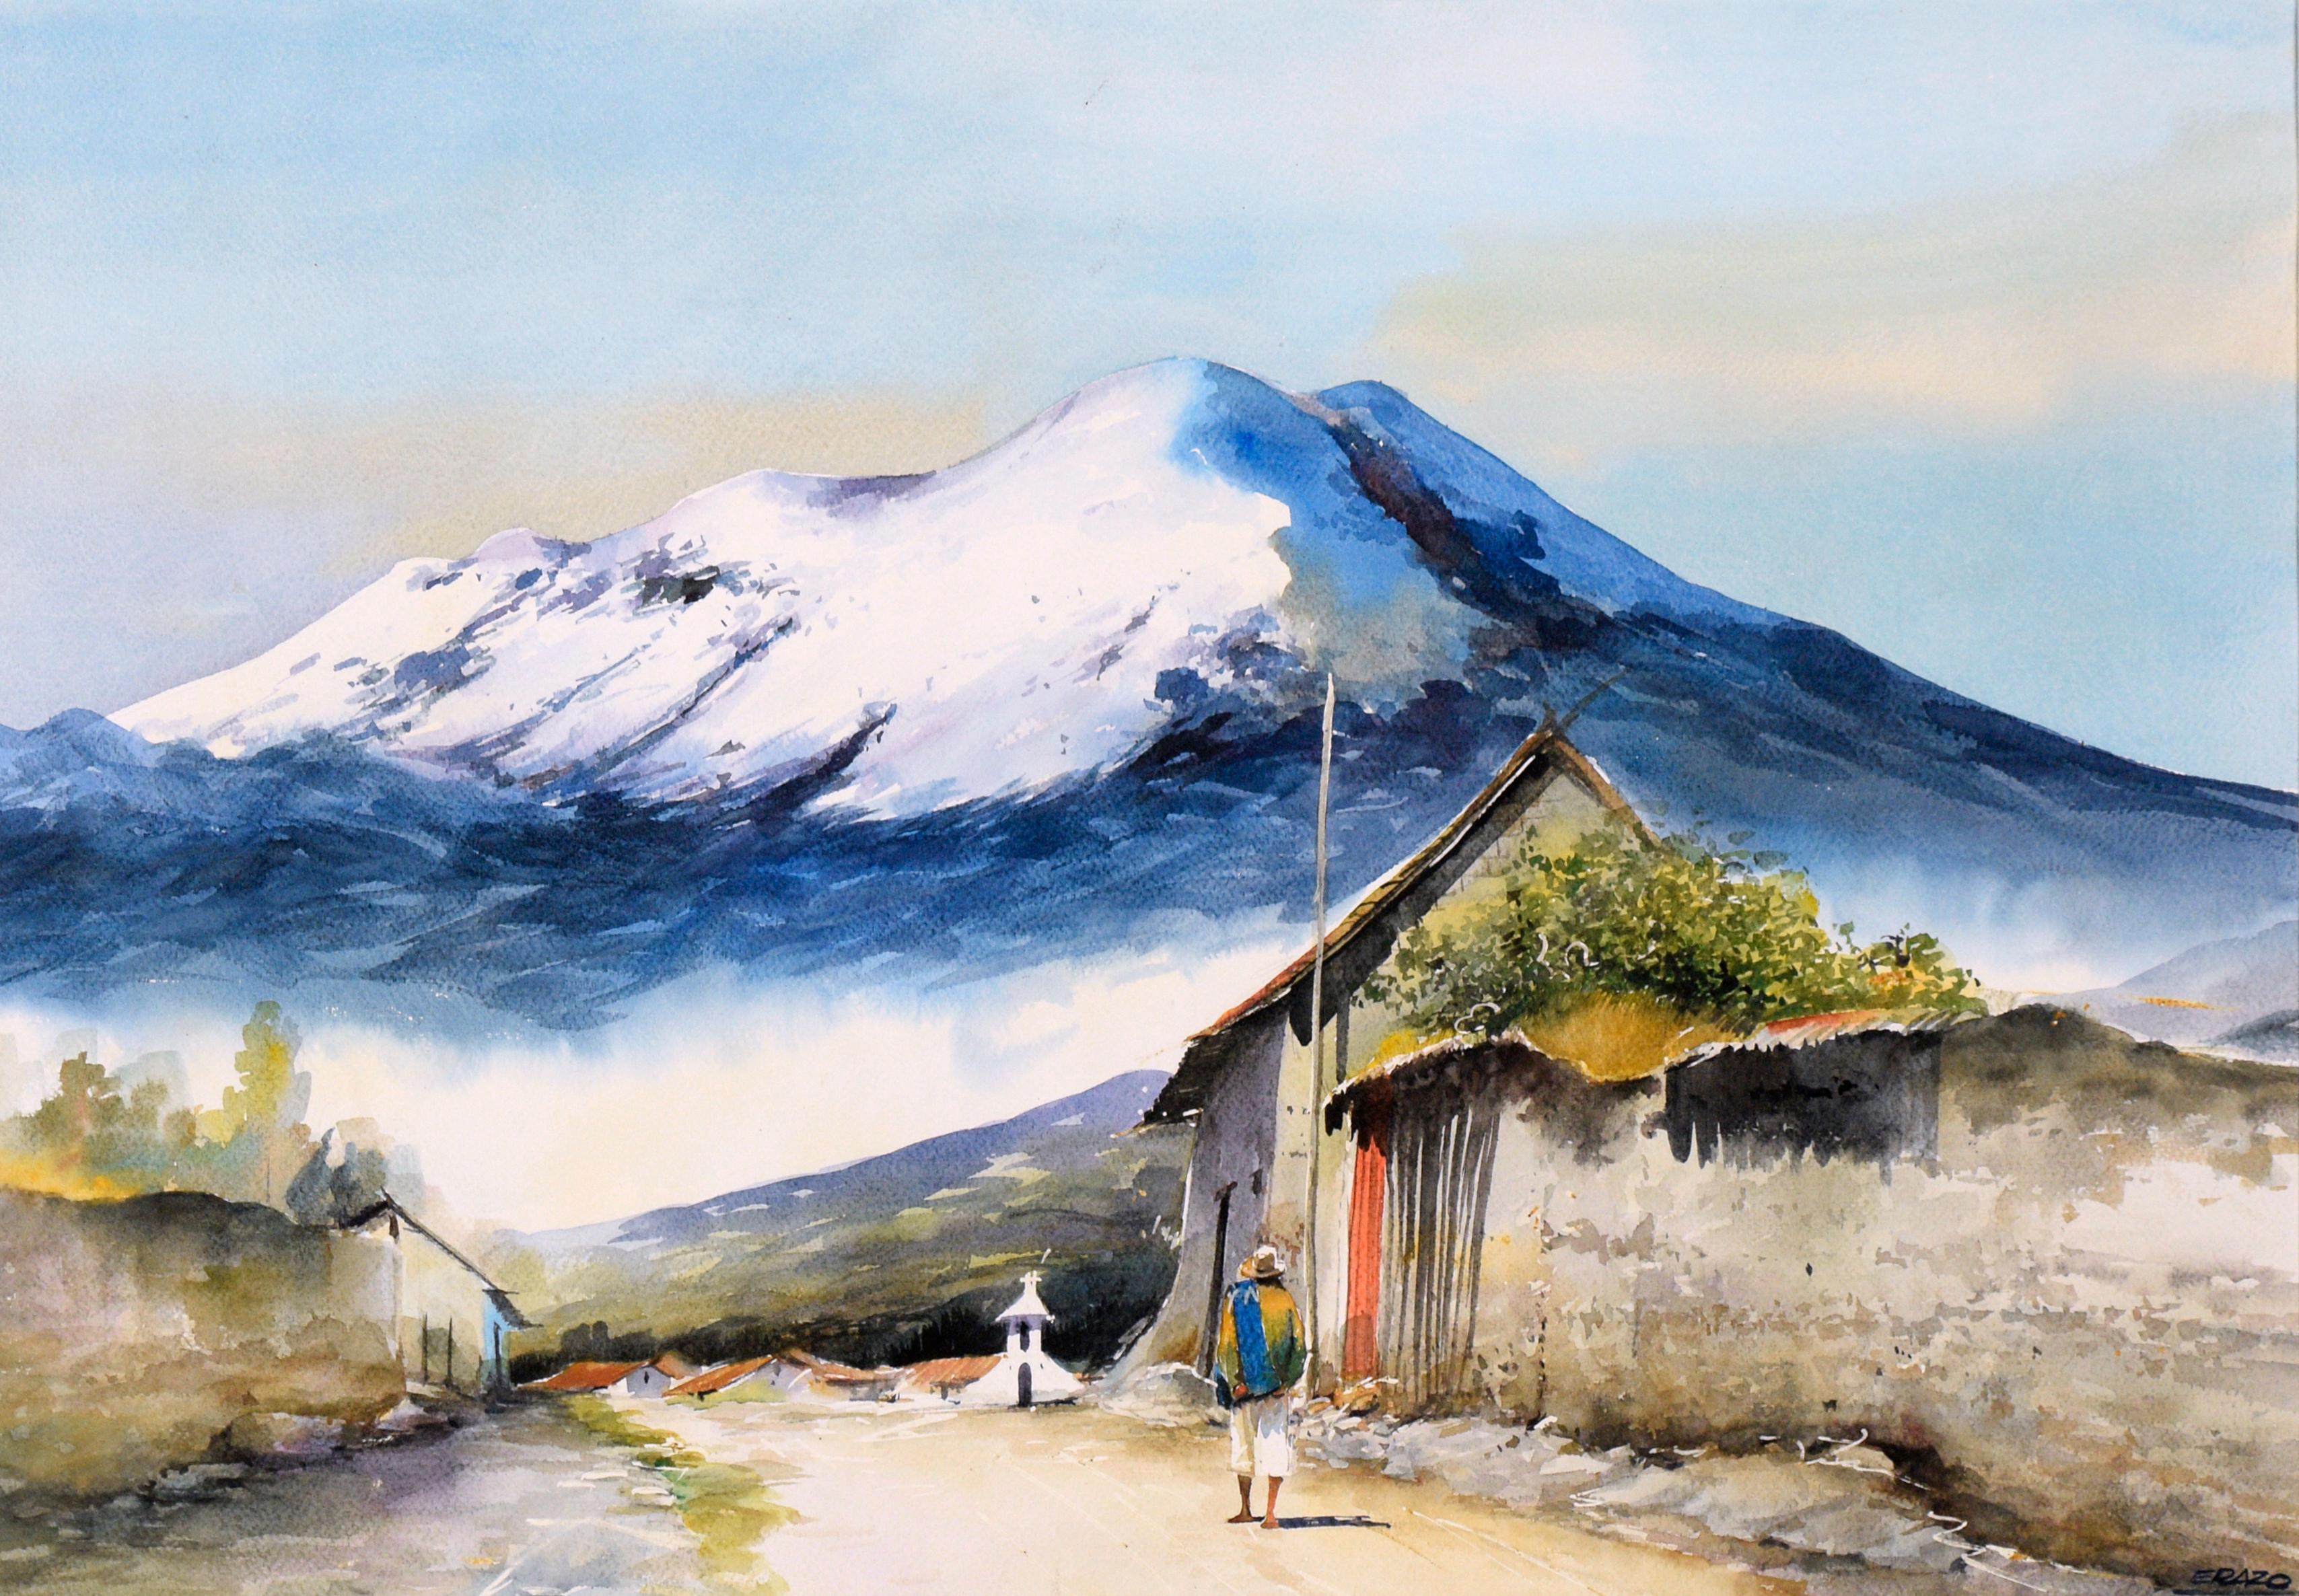 Village at the Base of the Andes Mountains - Watercolor Landscape on Paper - Painting by Erazo